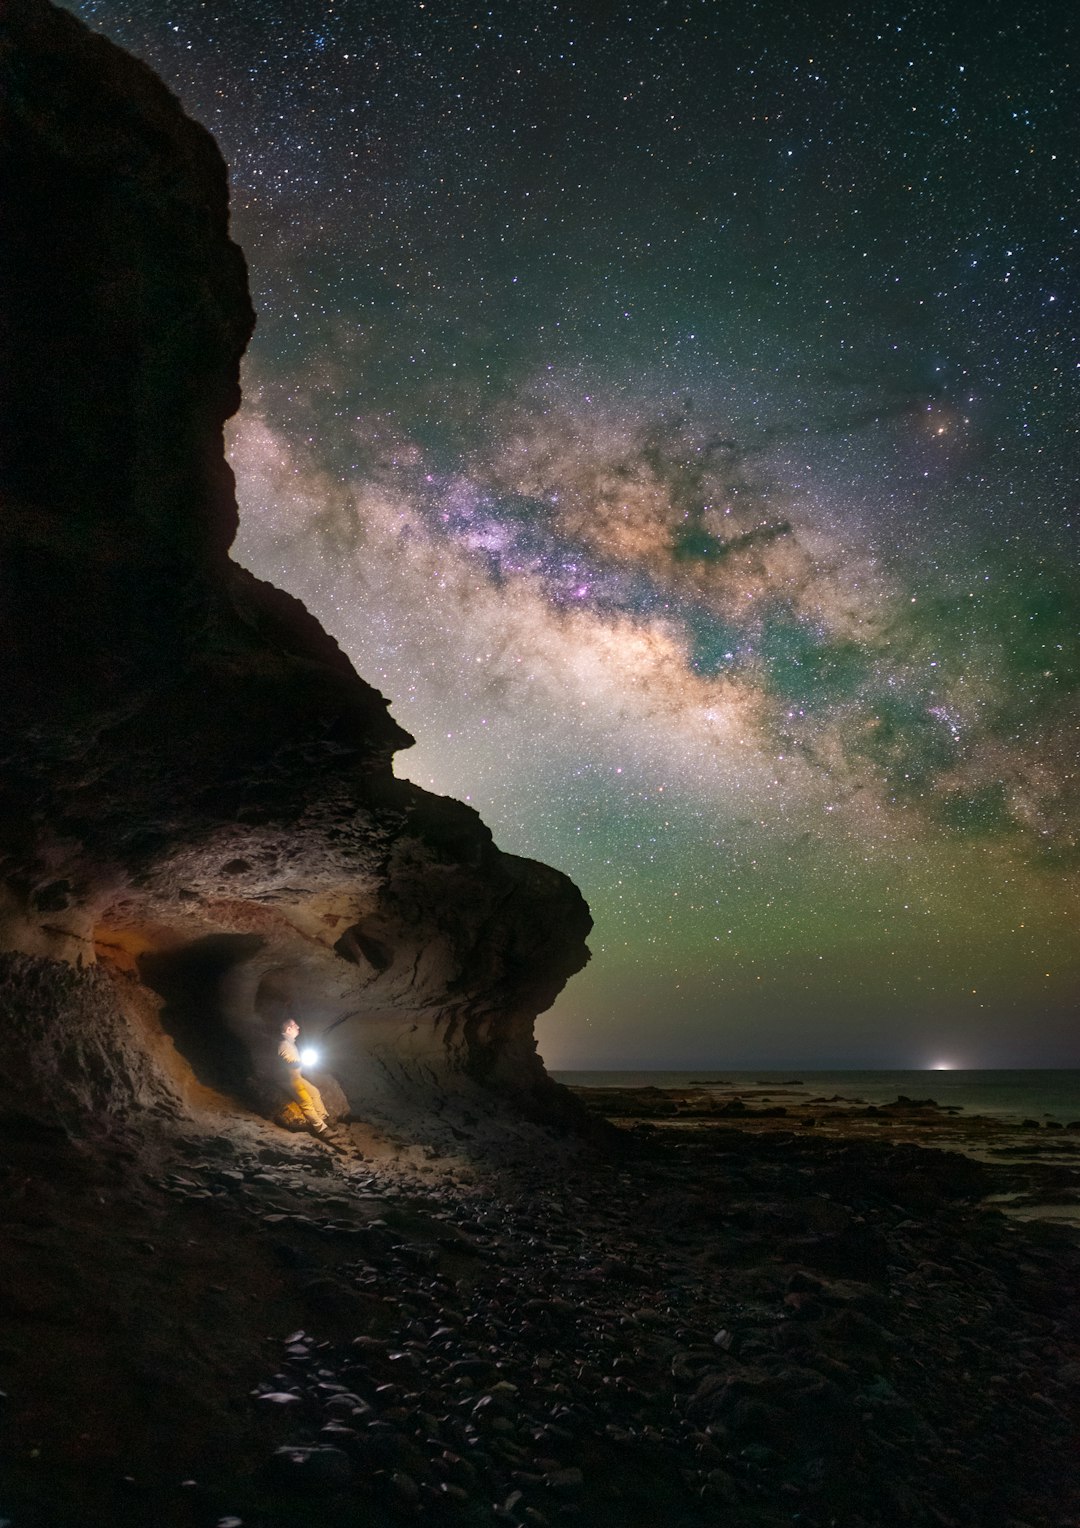 a man standing in a cave under a night sky filled with stars